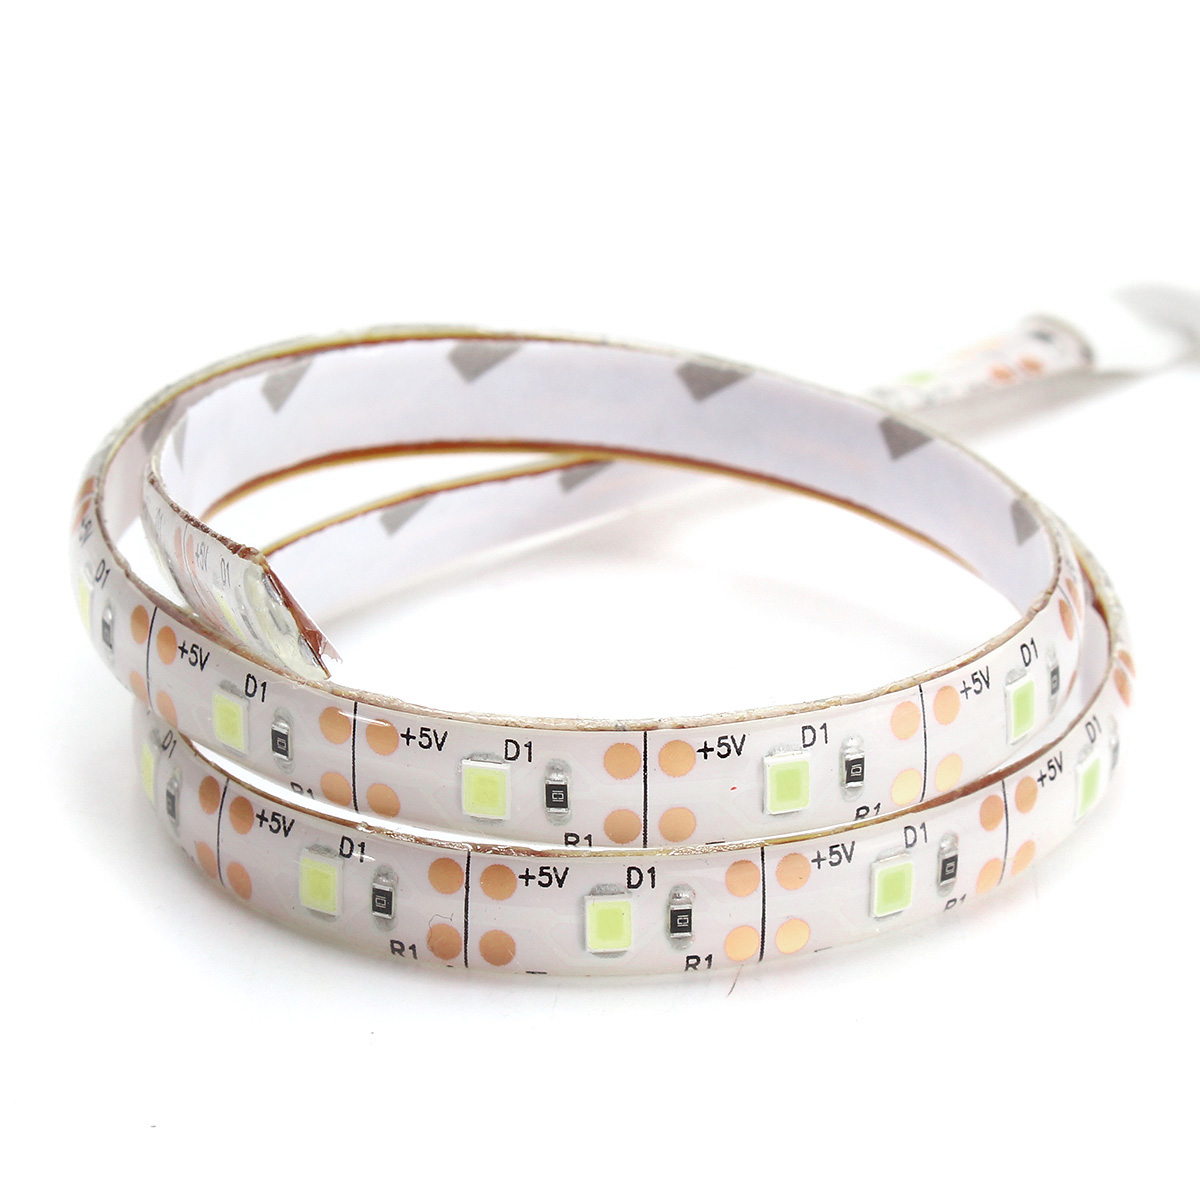 50CM-USB-Pure-White-Warm-White-Red-Blue-2835-SMD-Waterproof-LED-Strip-Backlight-for-Home-DC5V-1212541